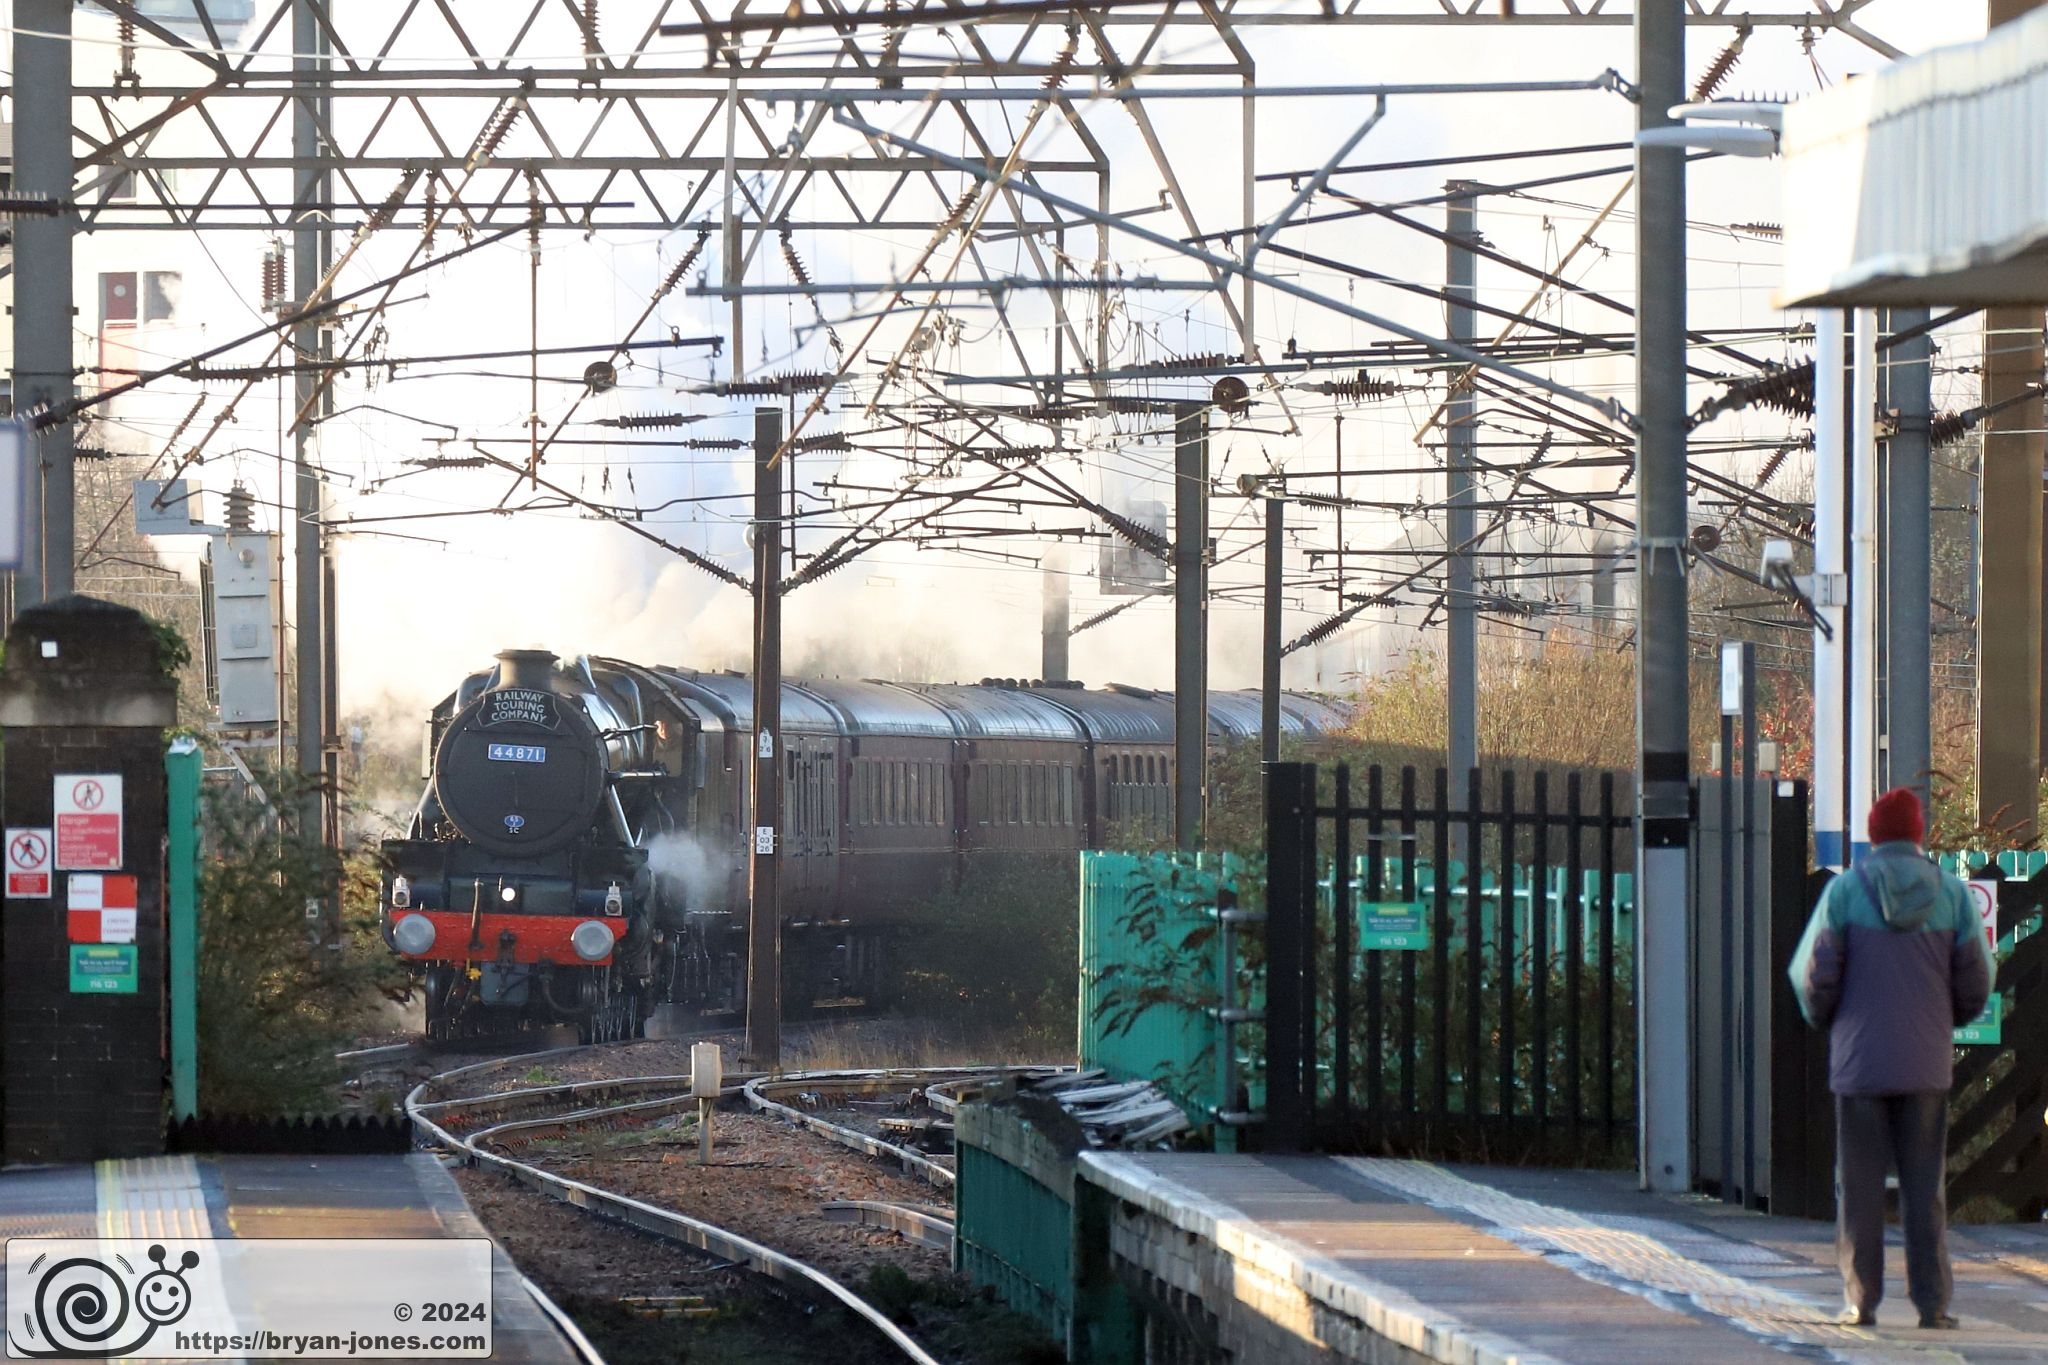 LMS Stanier Class 5 4-6-0 No. 44871 at Finsbury Park station at 07:46 on its way from Kings Cross to York with The Railway Touring Company's "The White Rose".